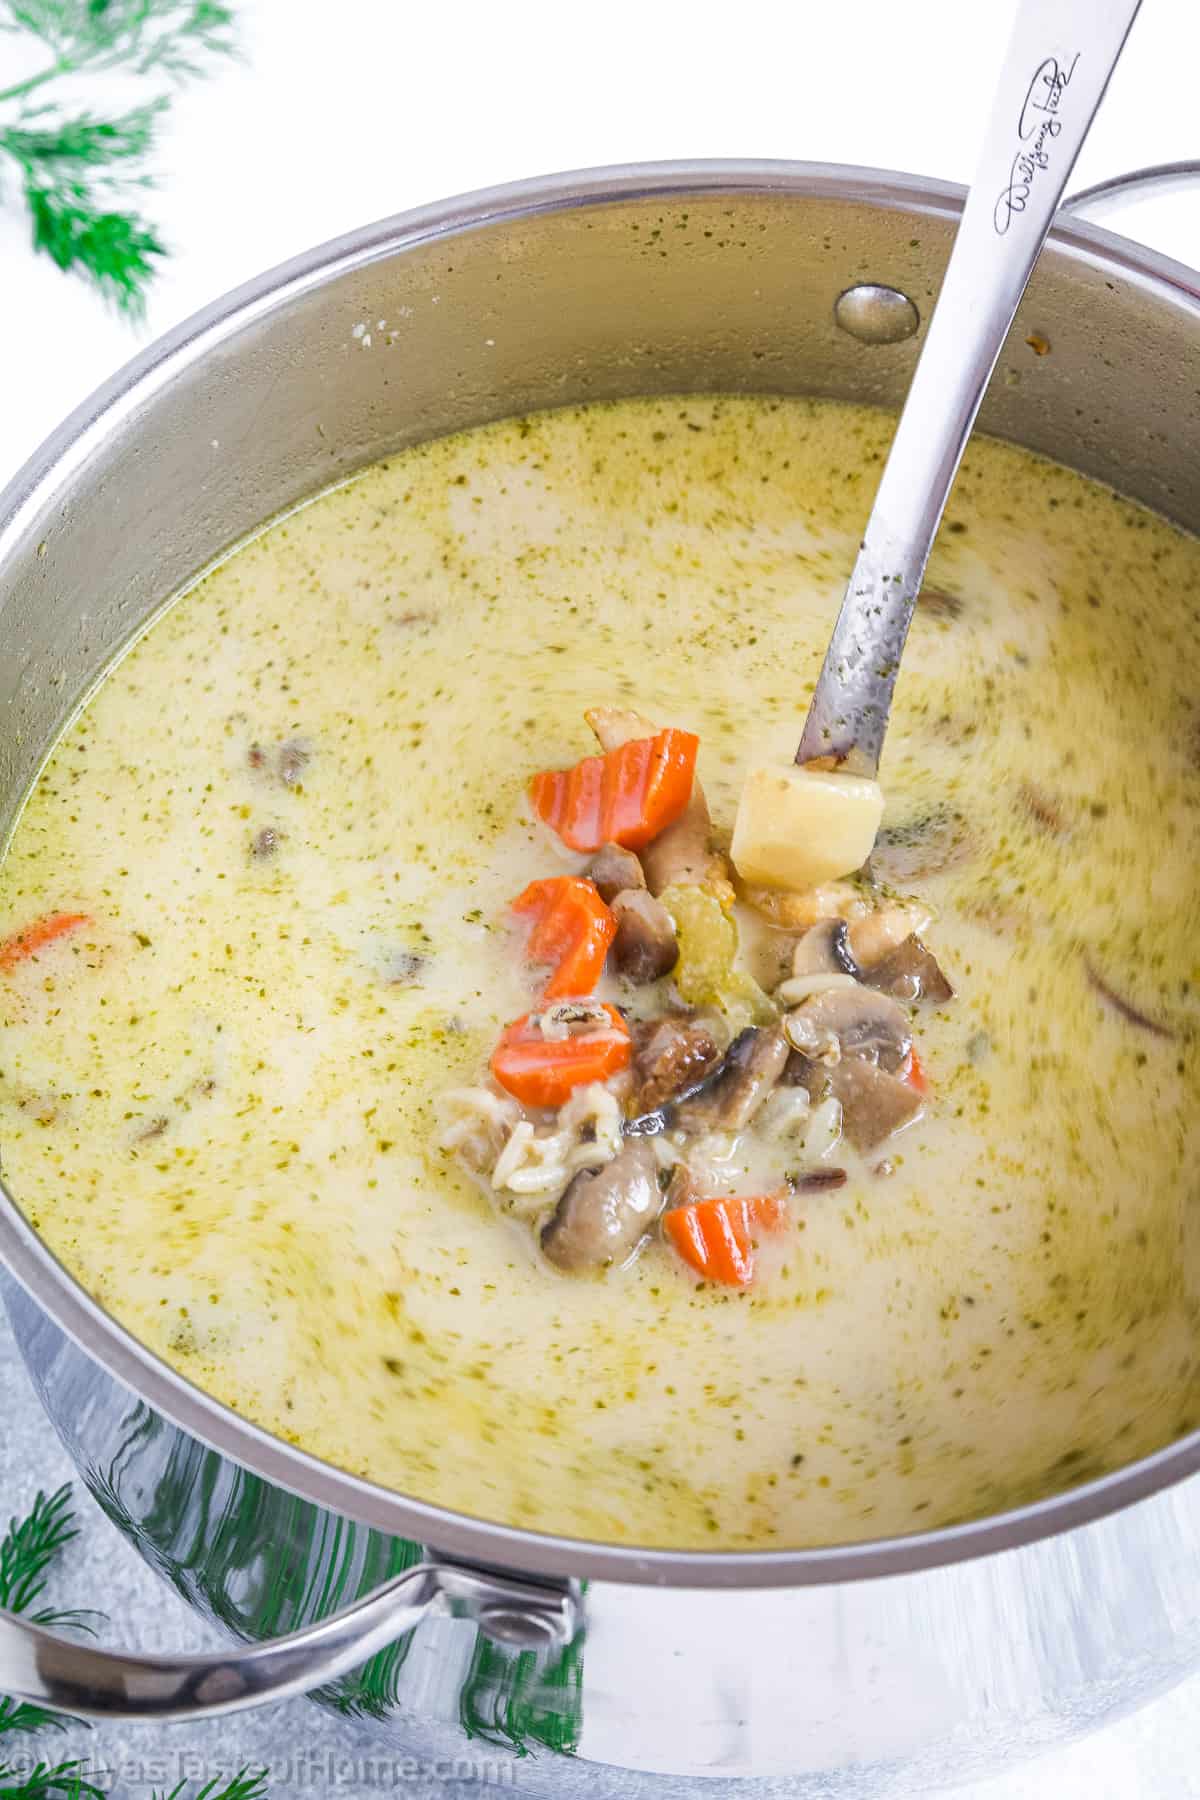 This soup is a wonderful blend of savory, hearty flavors that make it a perfect comforting meal for any day.